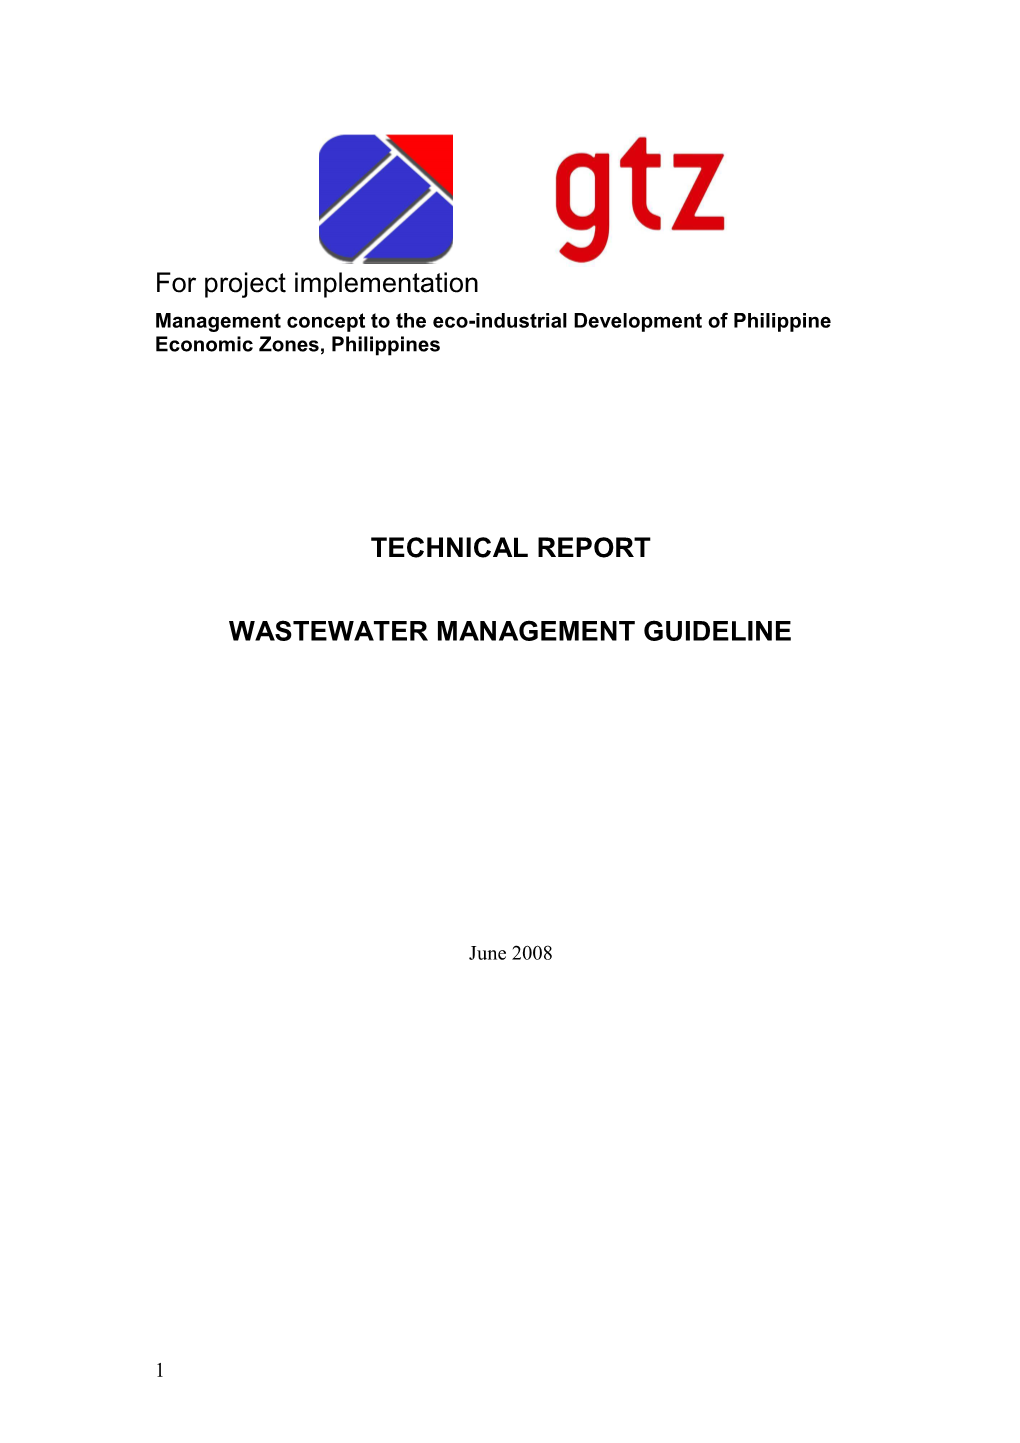 Technical Report Wastewater Management Guideline